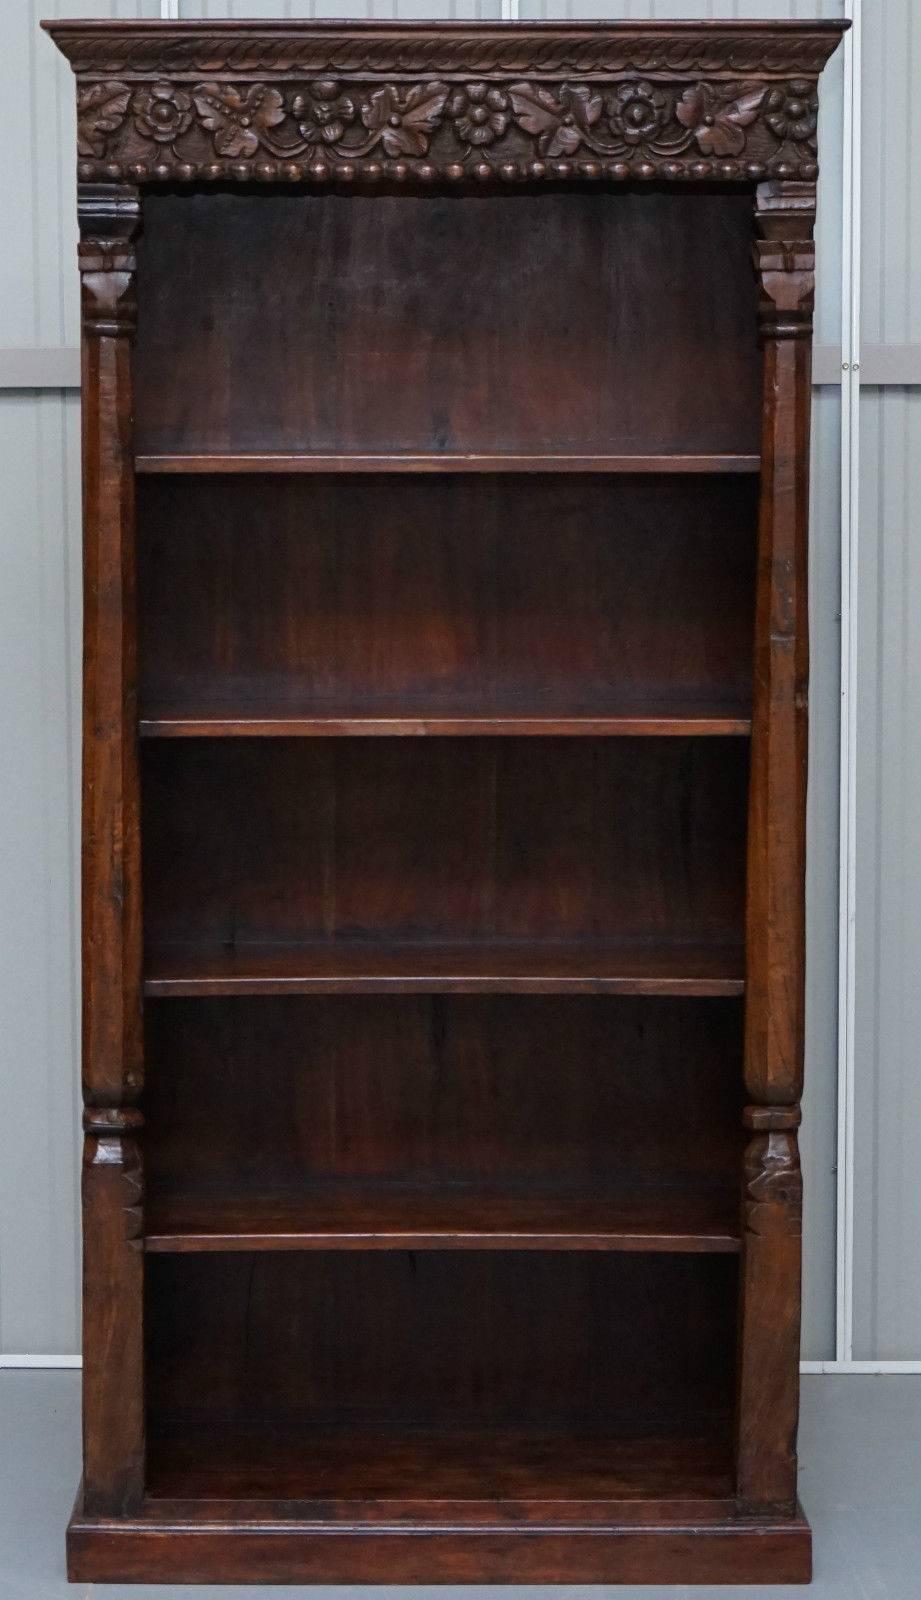 Solid Hand-Carved Teak Wood Bookcase, Extremely Heavy and Solid Well Made Piece 5